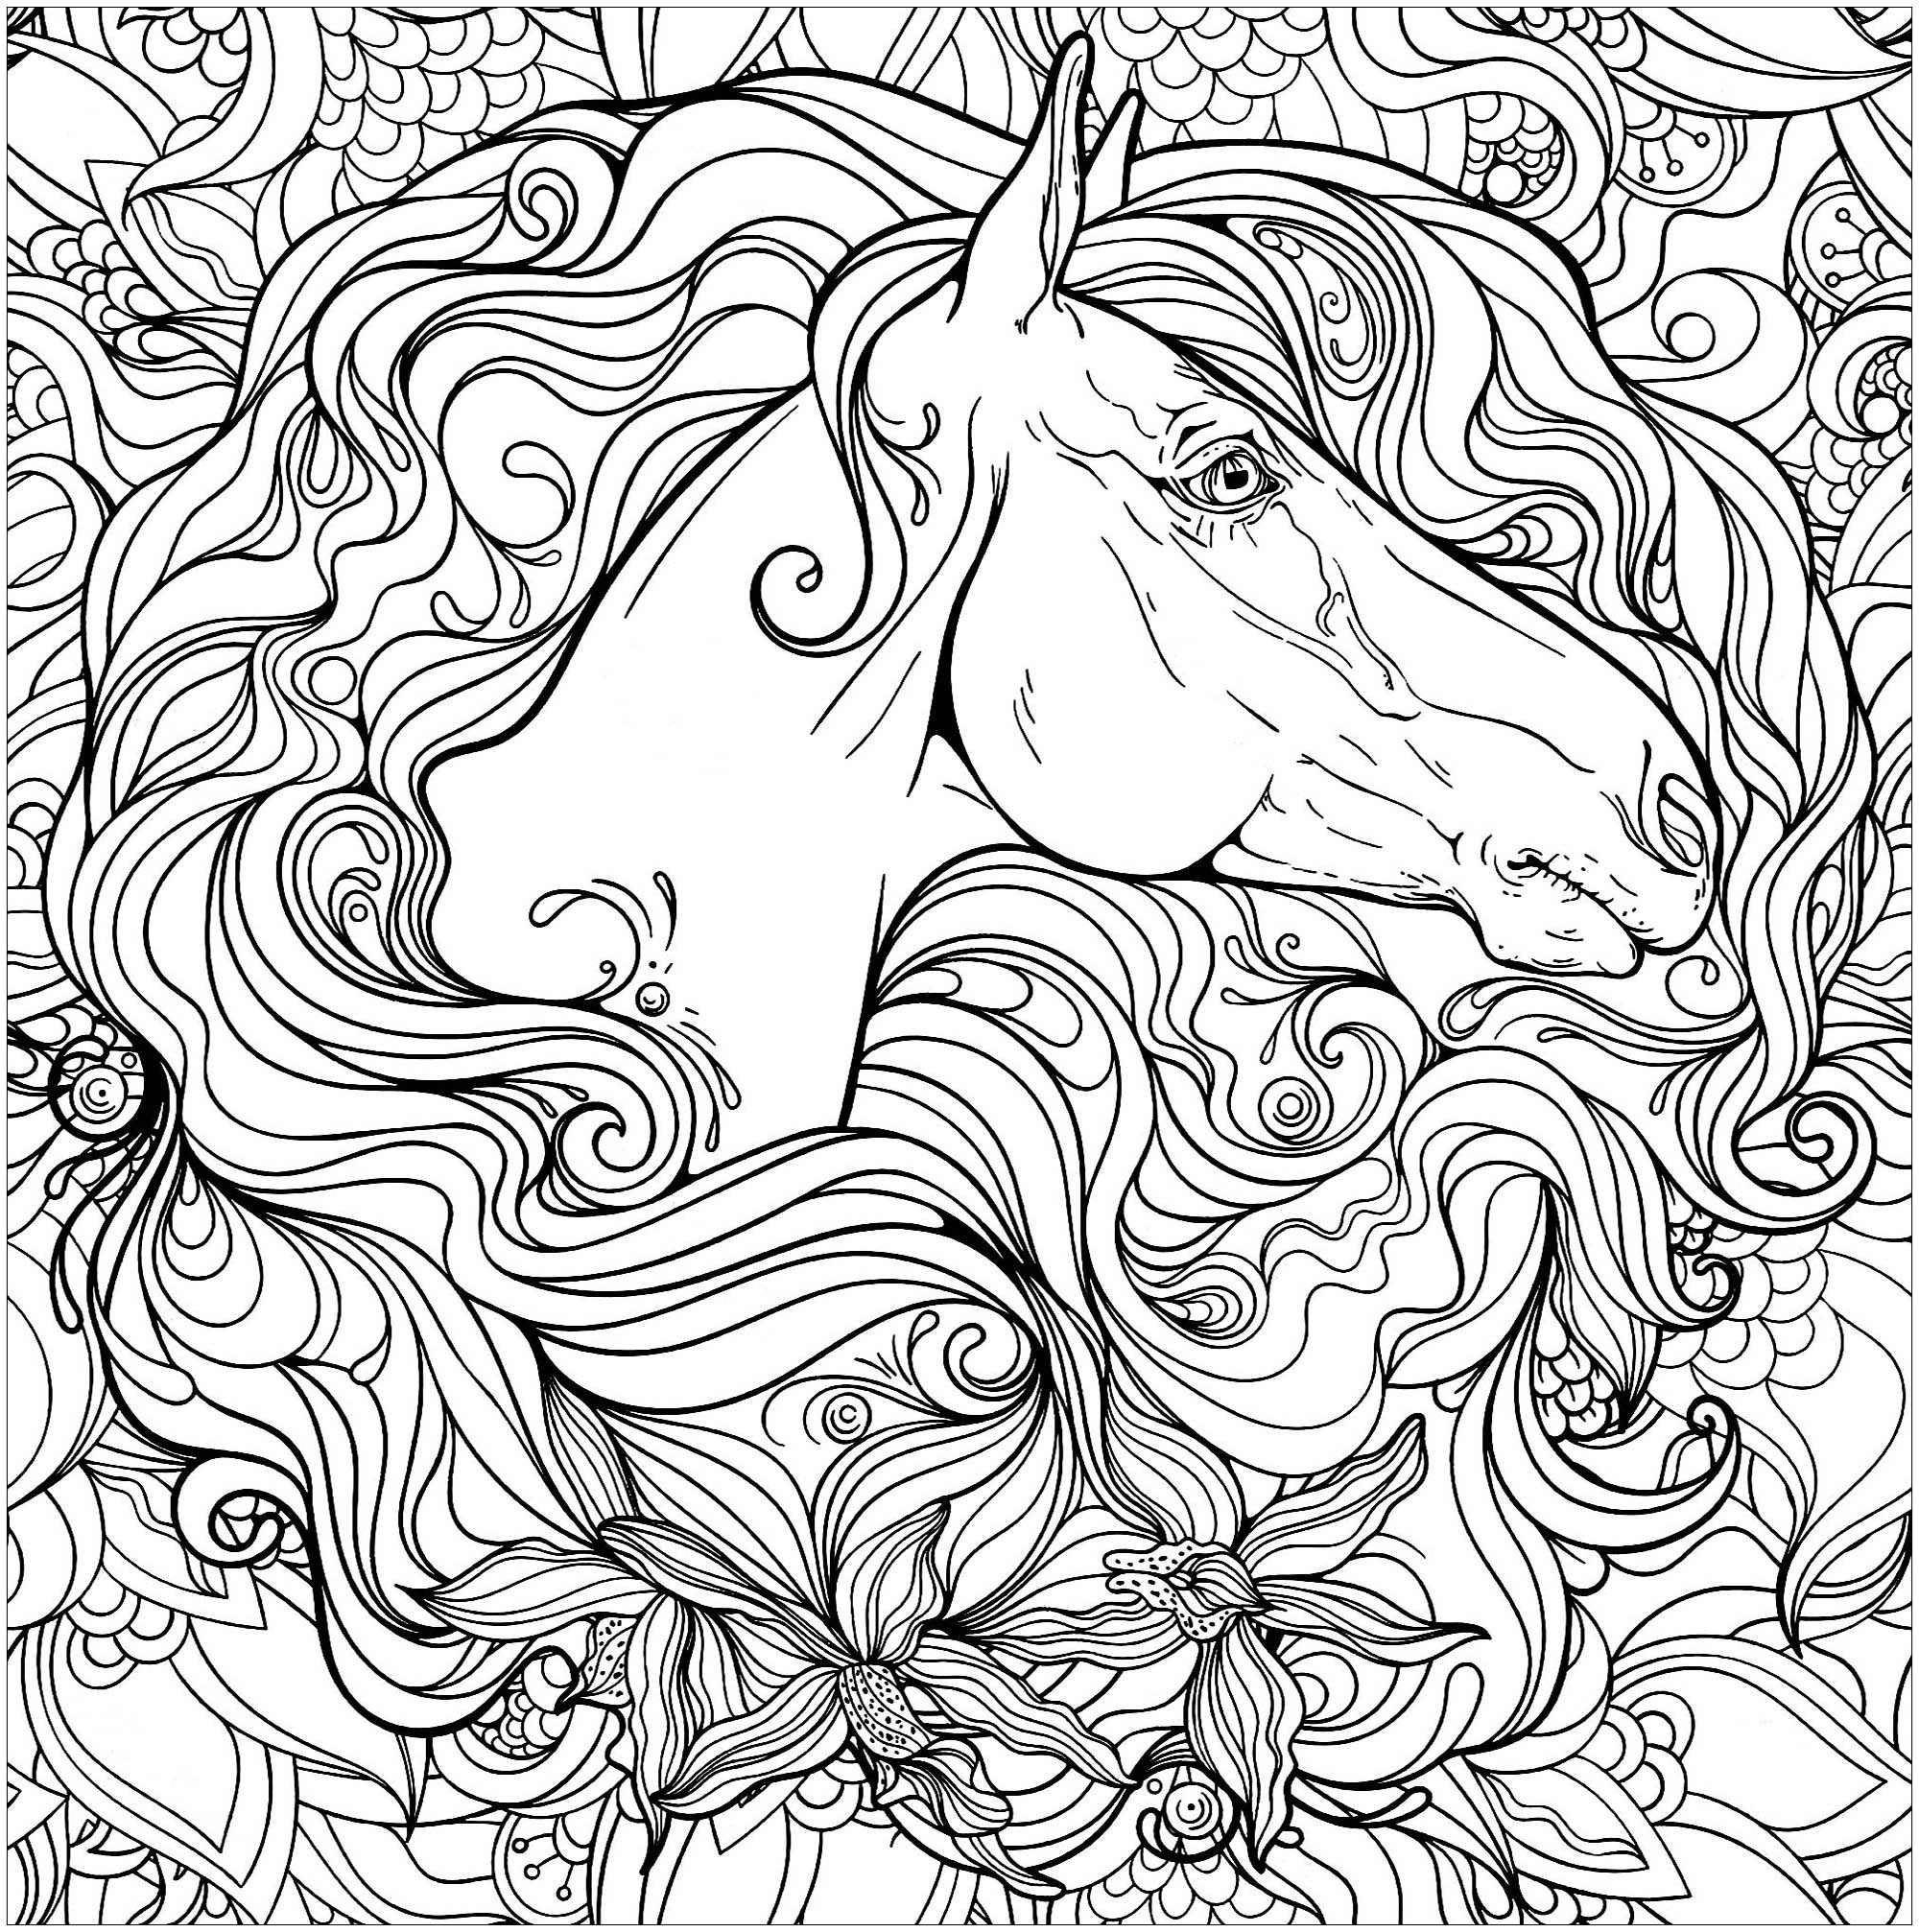 image=horses coloring horse in flowers 1